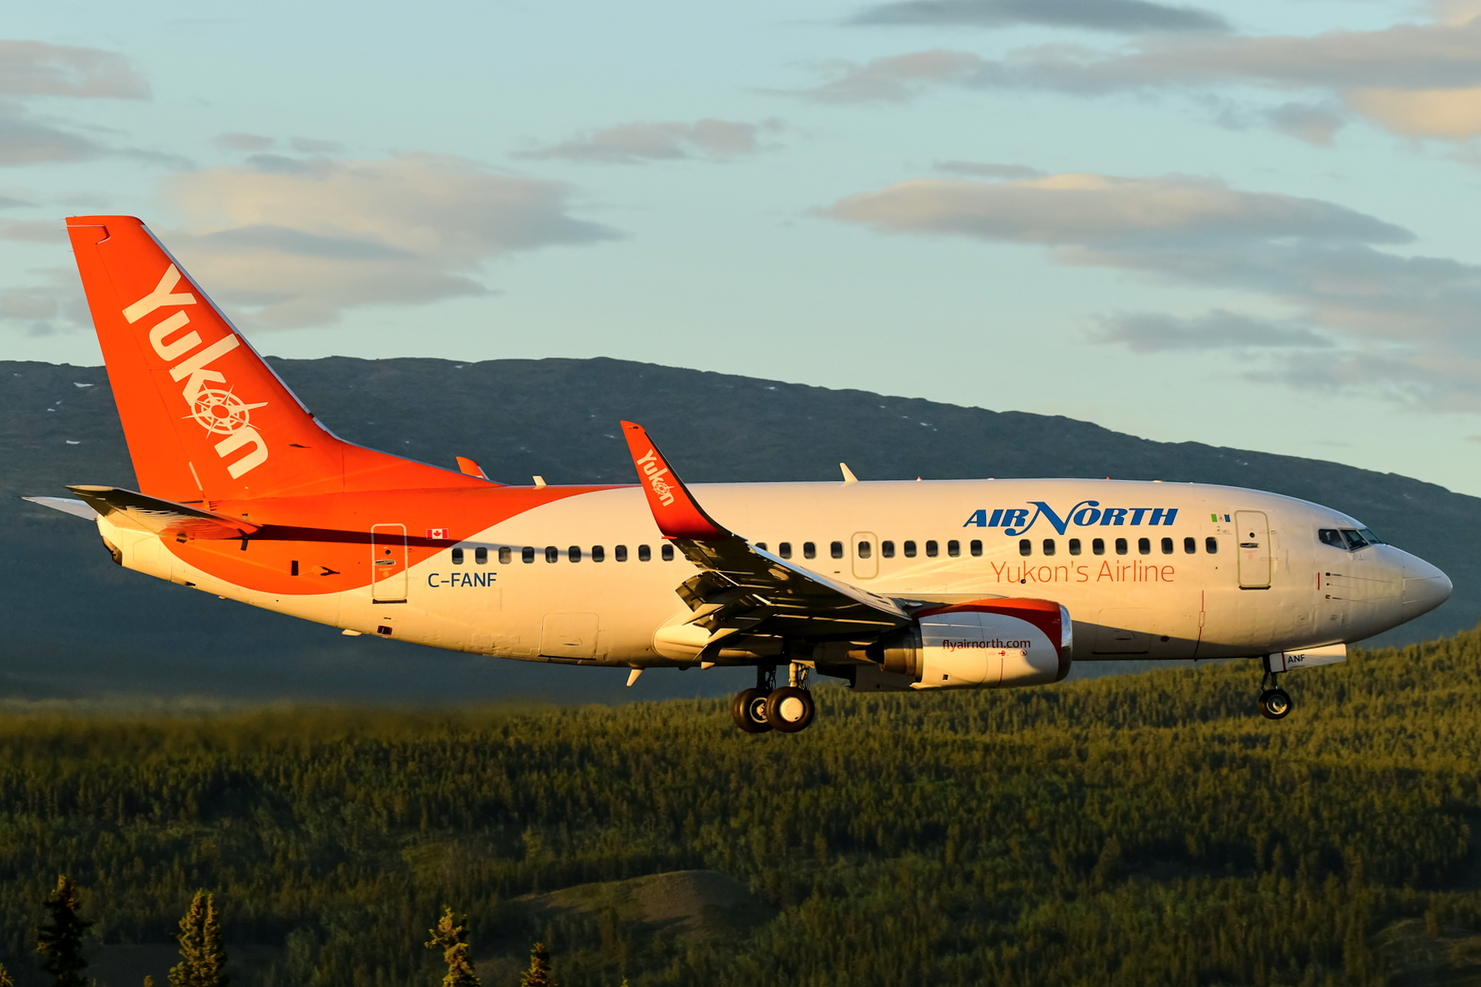 Air North, Yukon’s Airline Boeing 737-500. Click to enlarge.